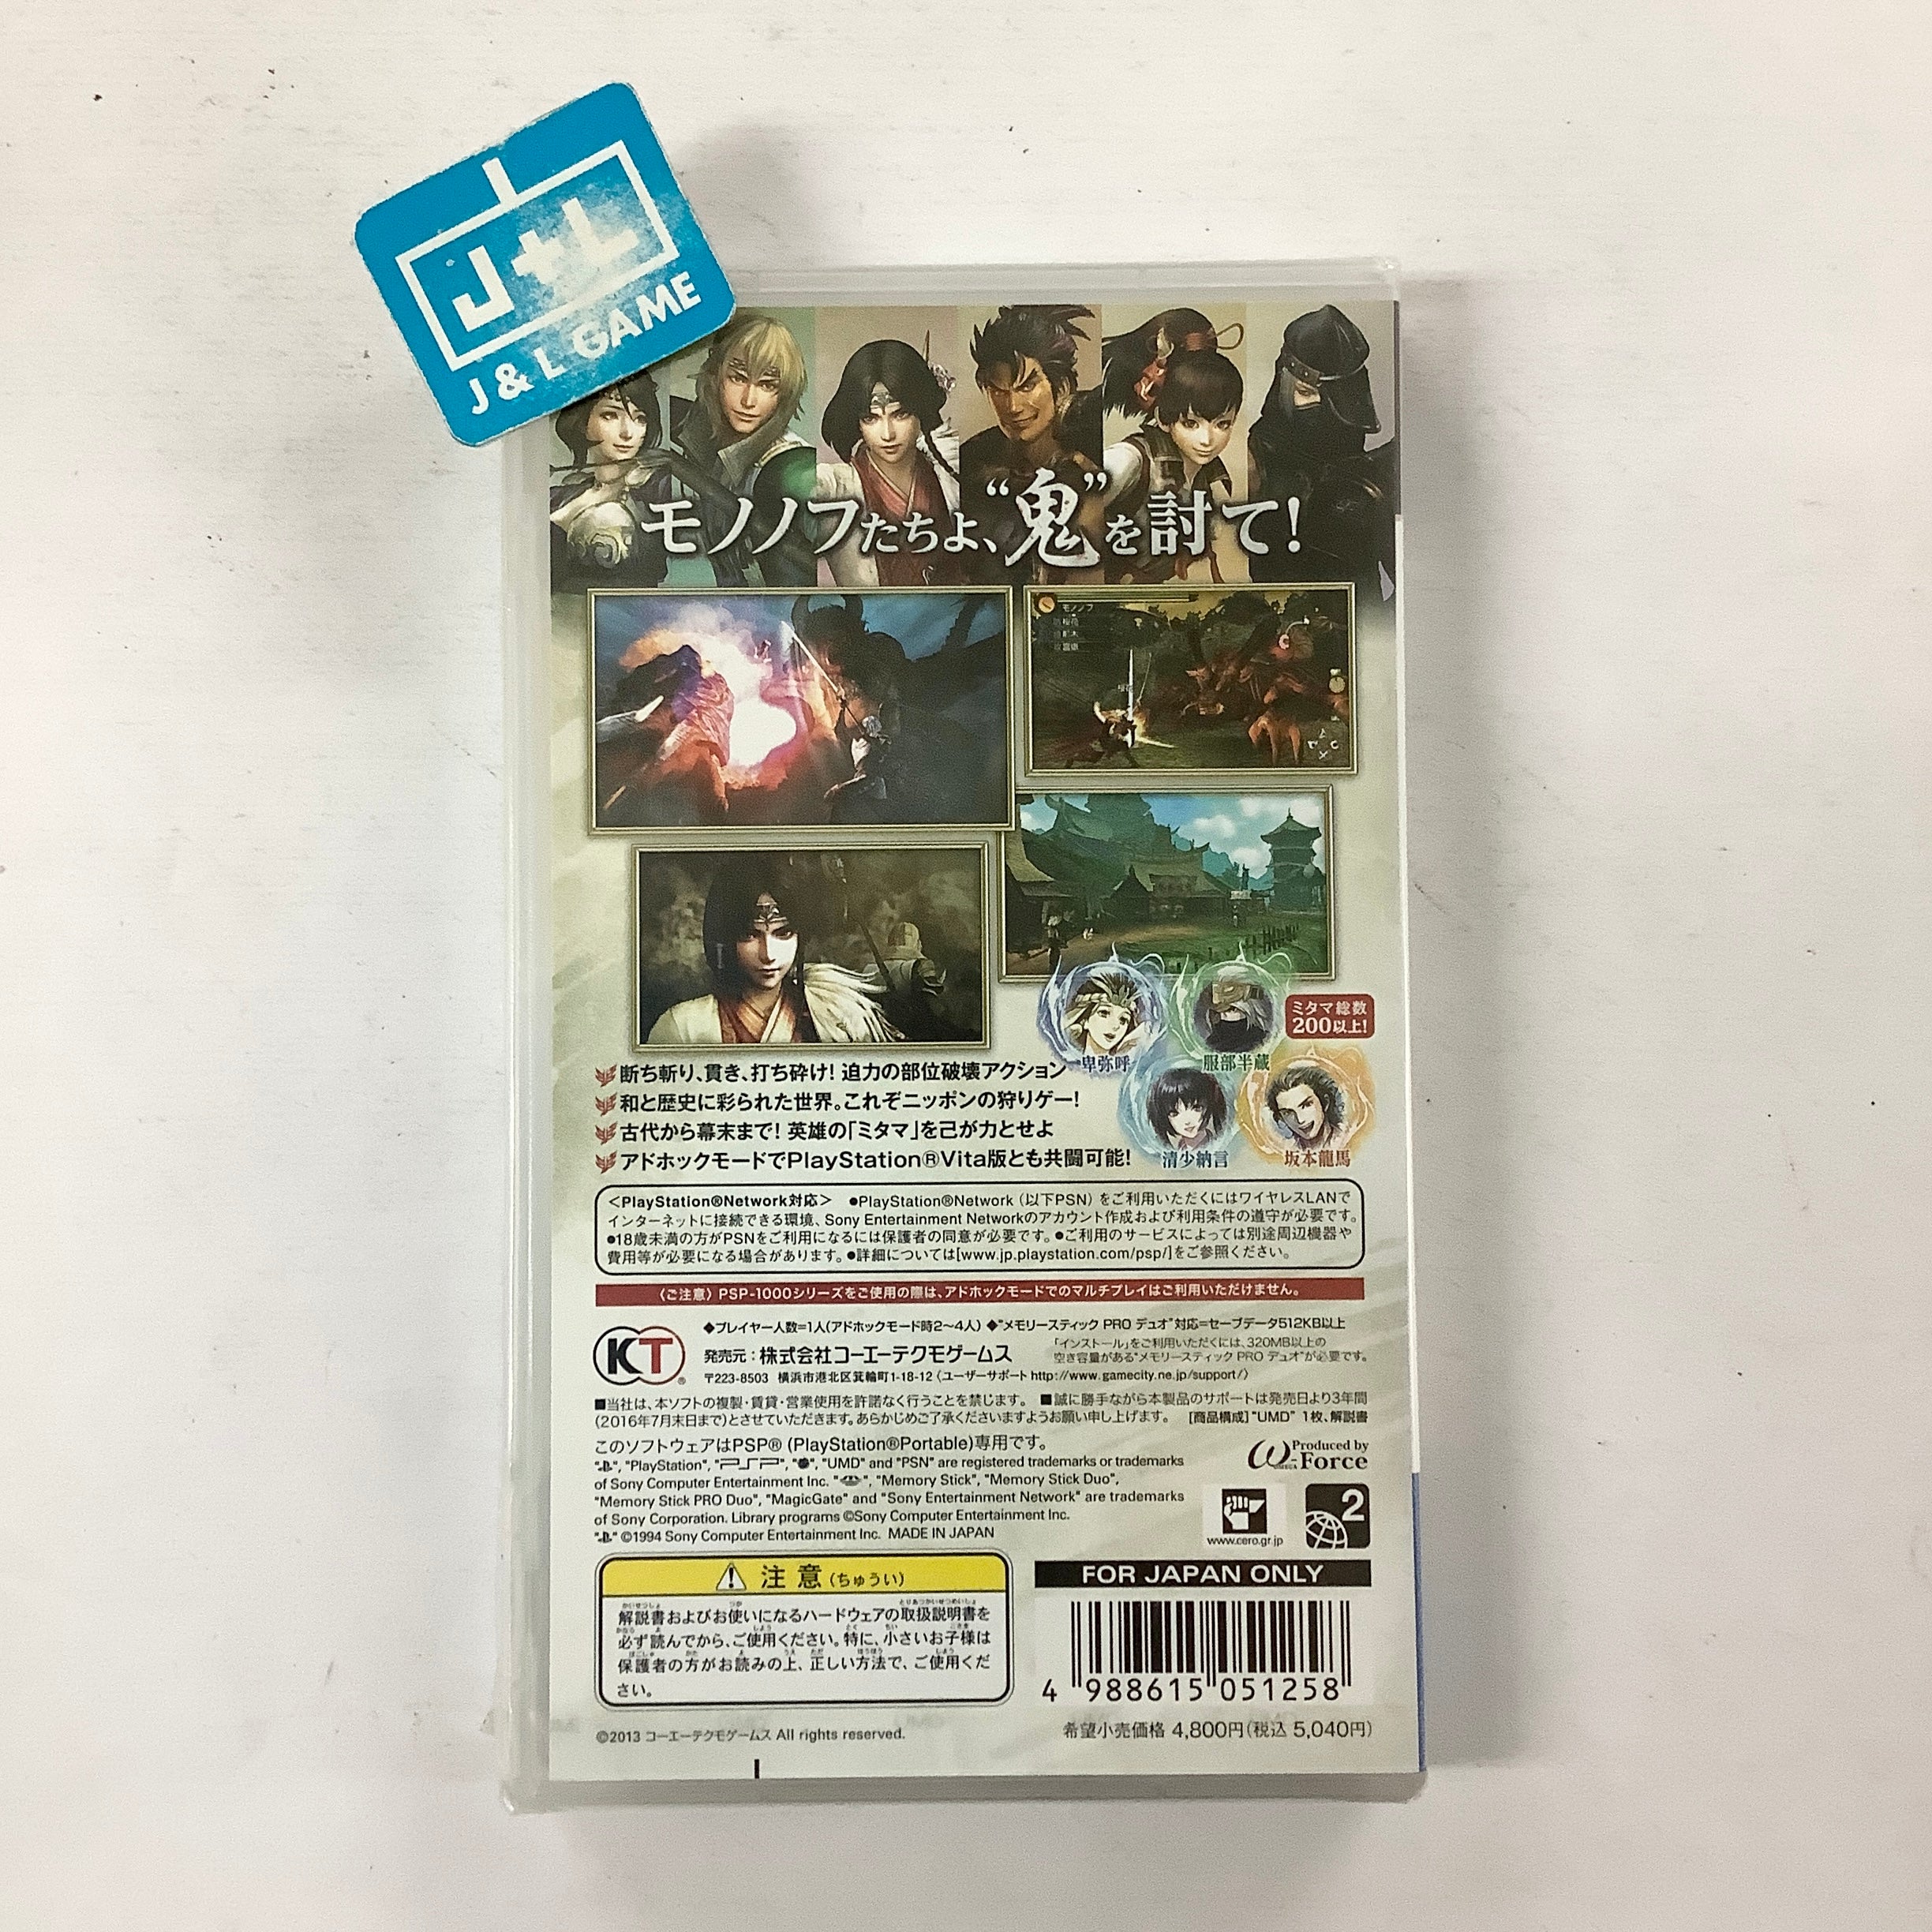 Toukiden - Sony PSP (Japanese Import) Video Games Koei Tecmo Games   